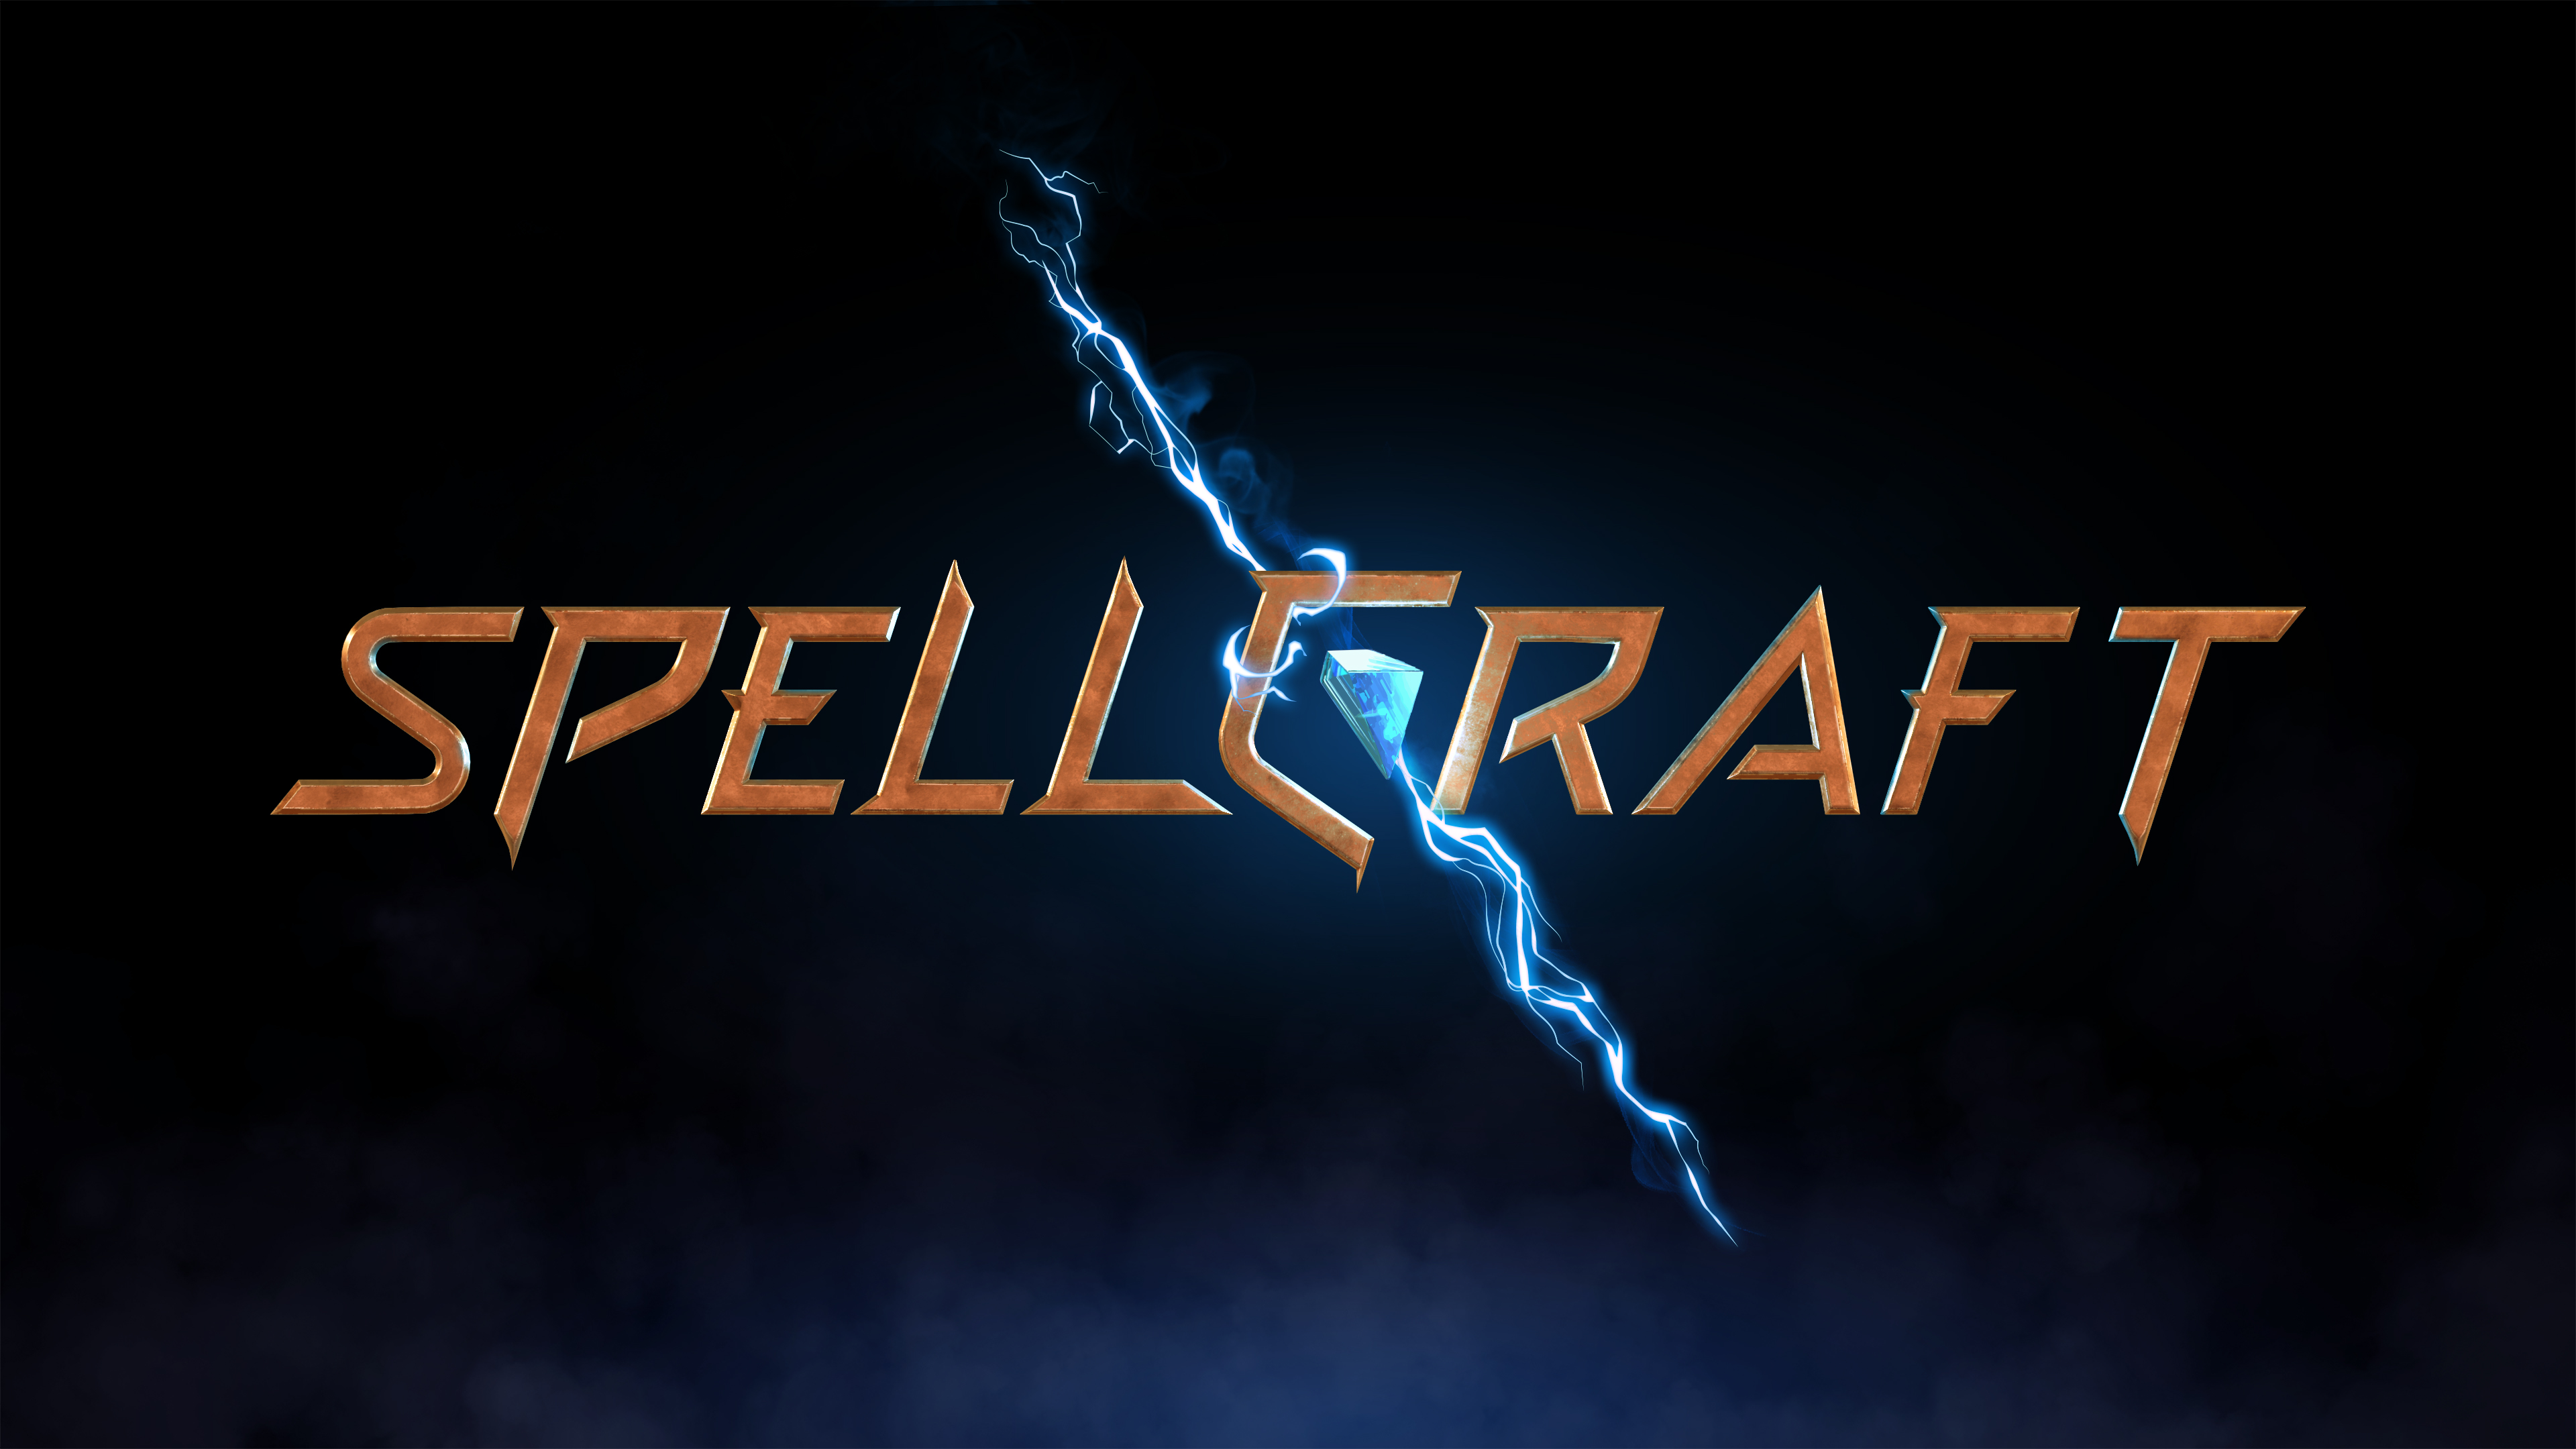 Spellcraft is launching a public alpha on Steam